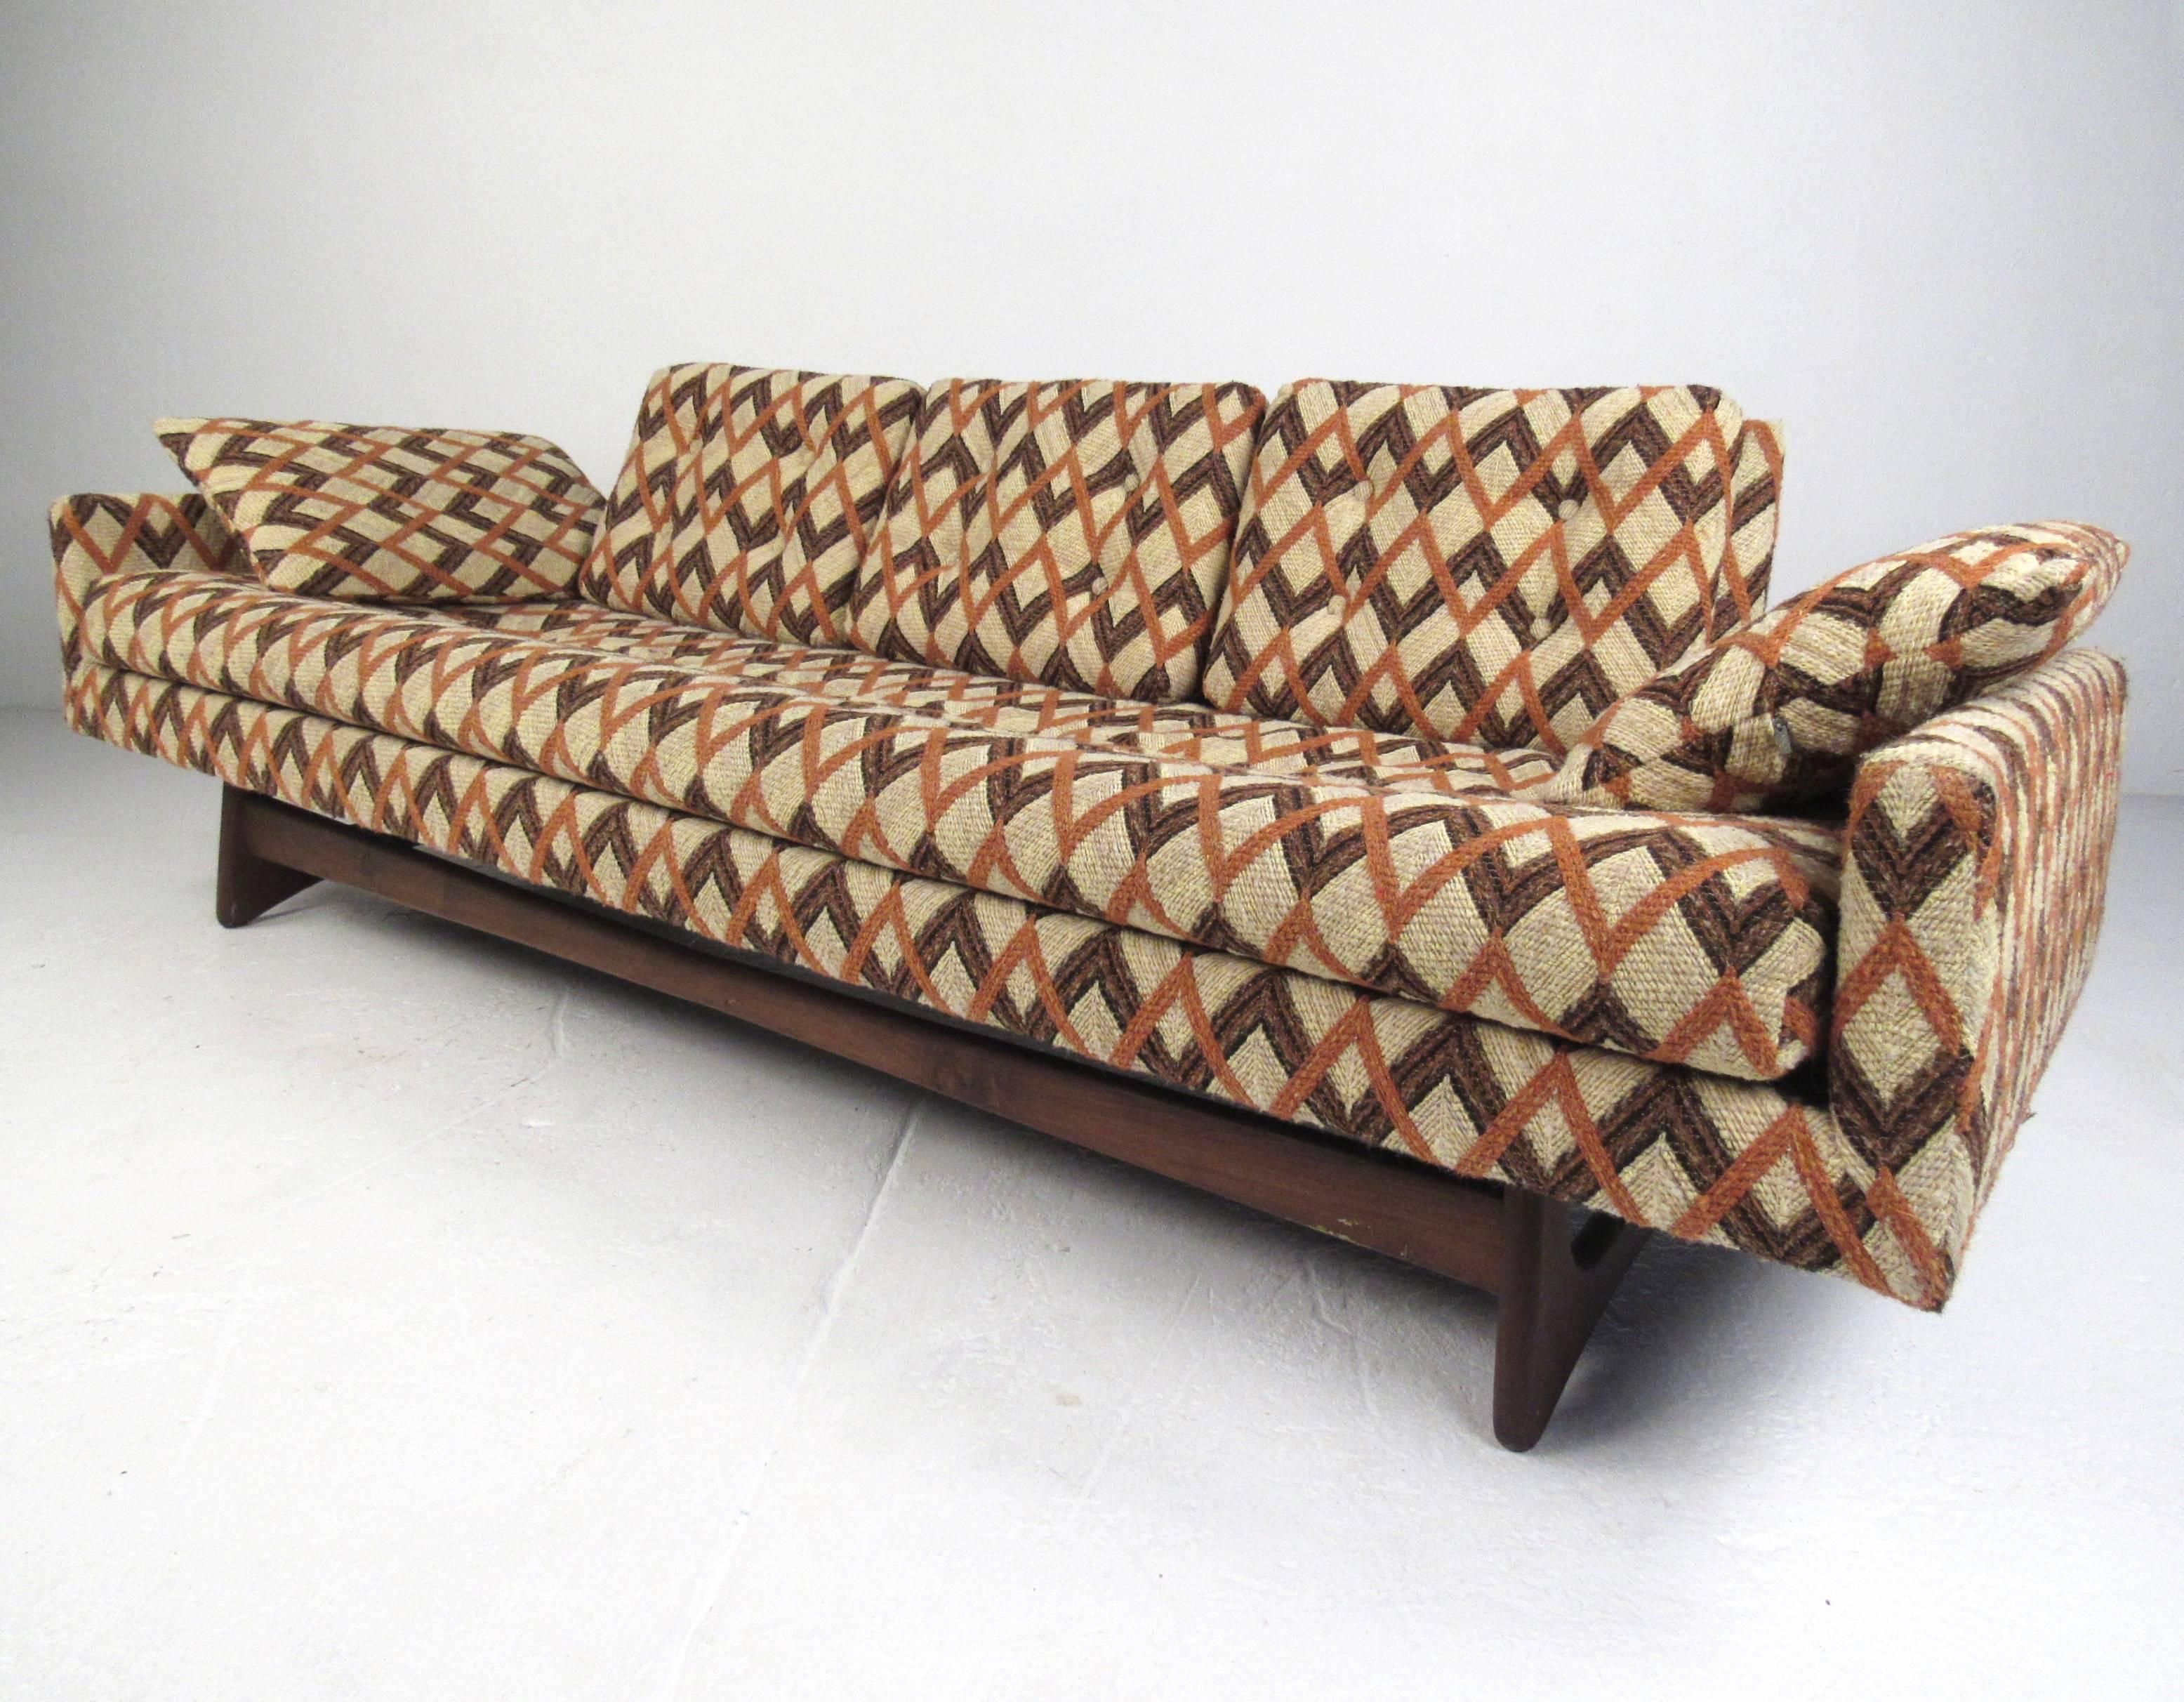 This large Adrian Pearsall sofa features unique sculpted walnut legs and a unique and stylish design. Tufted vintage upholstery further accentuates the Mid-Century Modern appeal of this Craft Associates four seat sofa. Please confirm item location